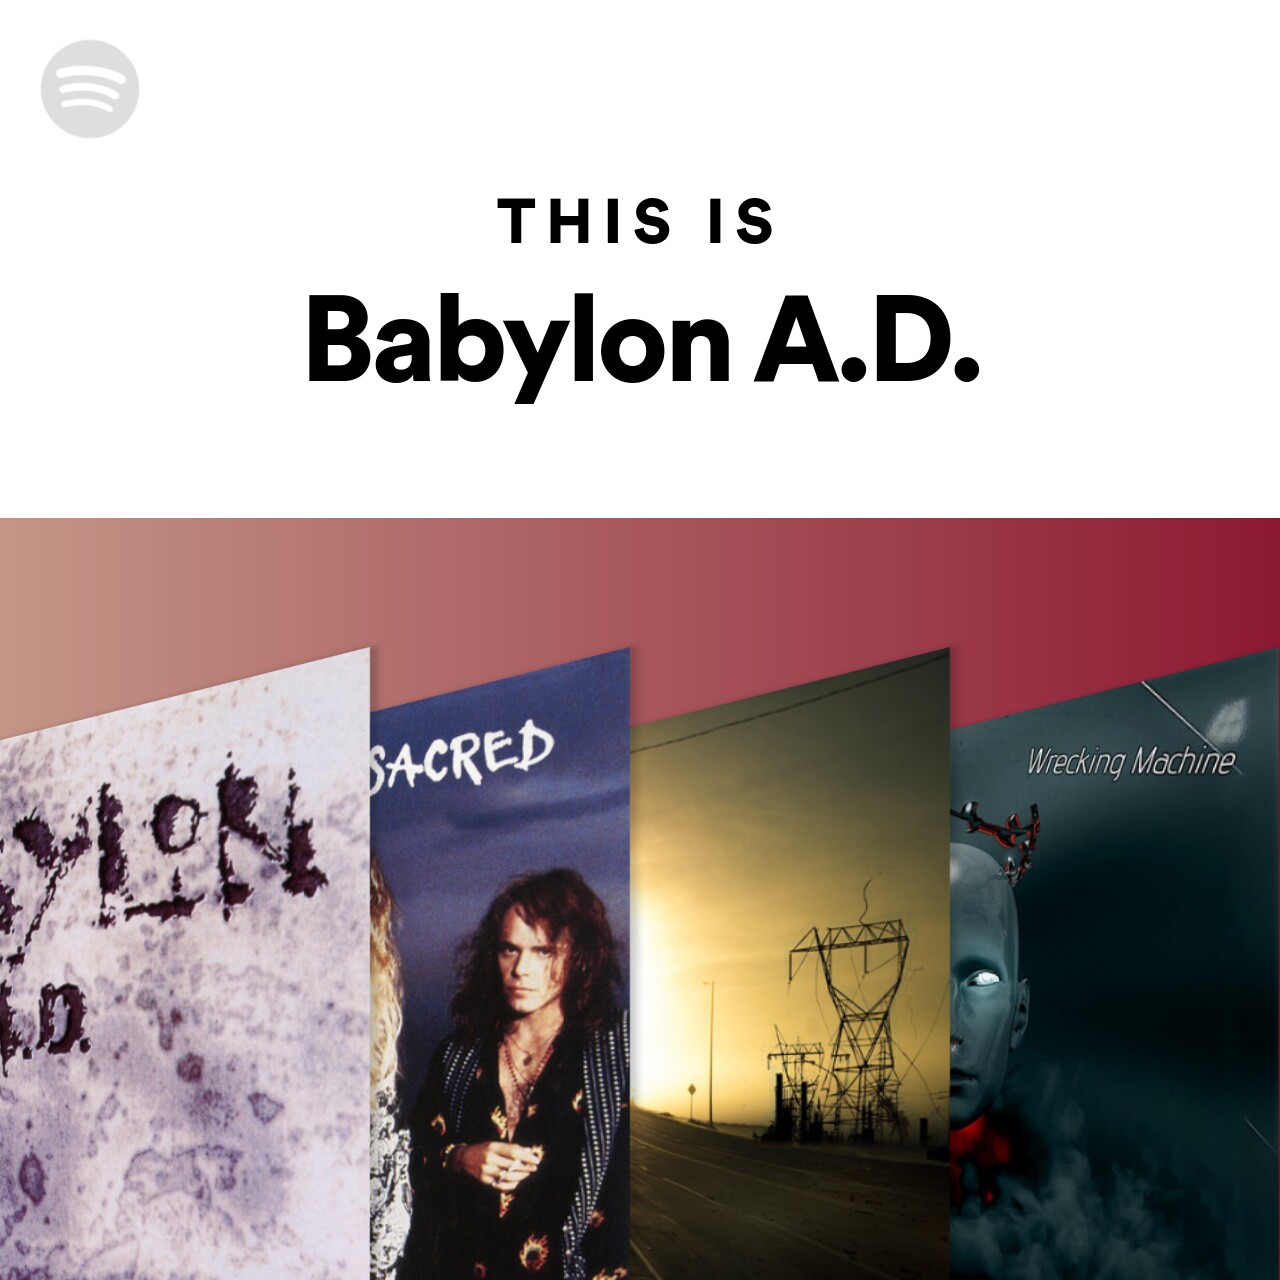 This Is Babylon A.D.